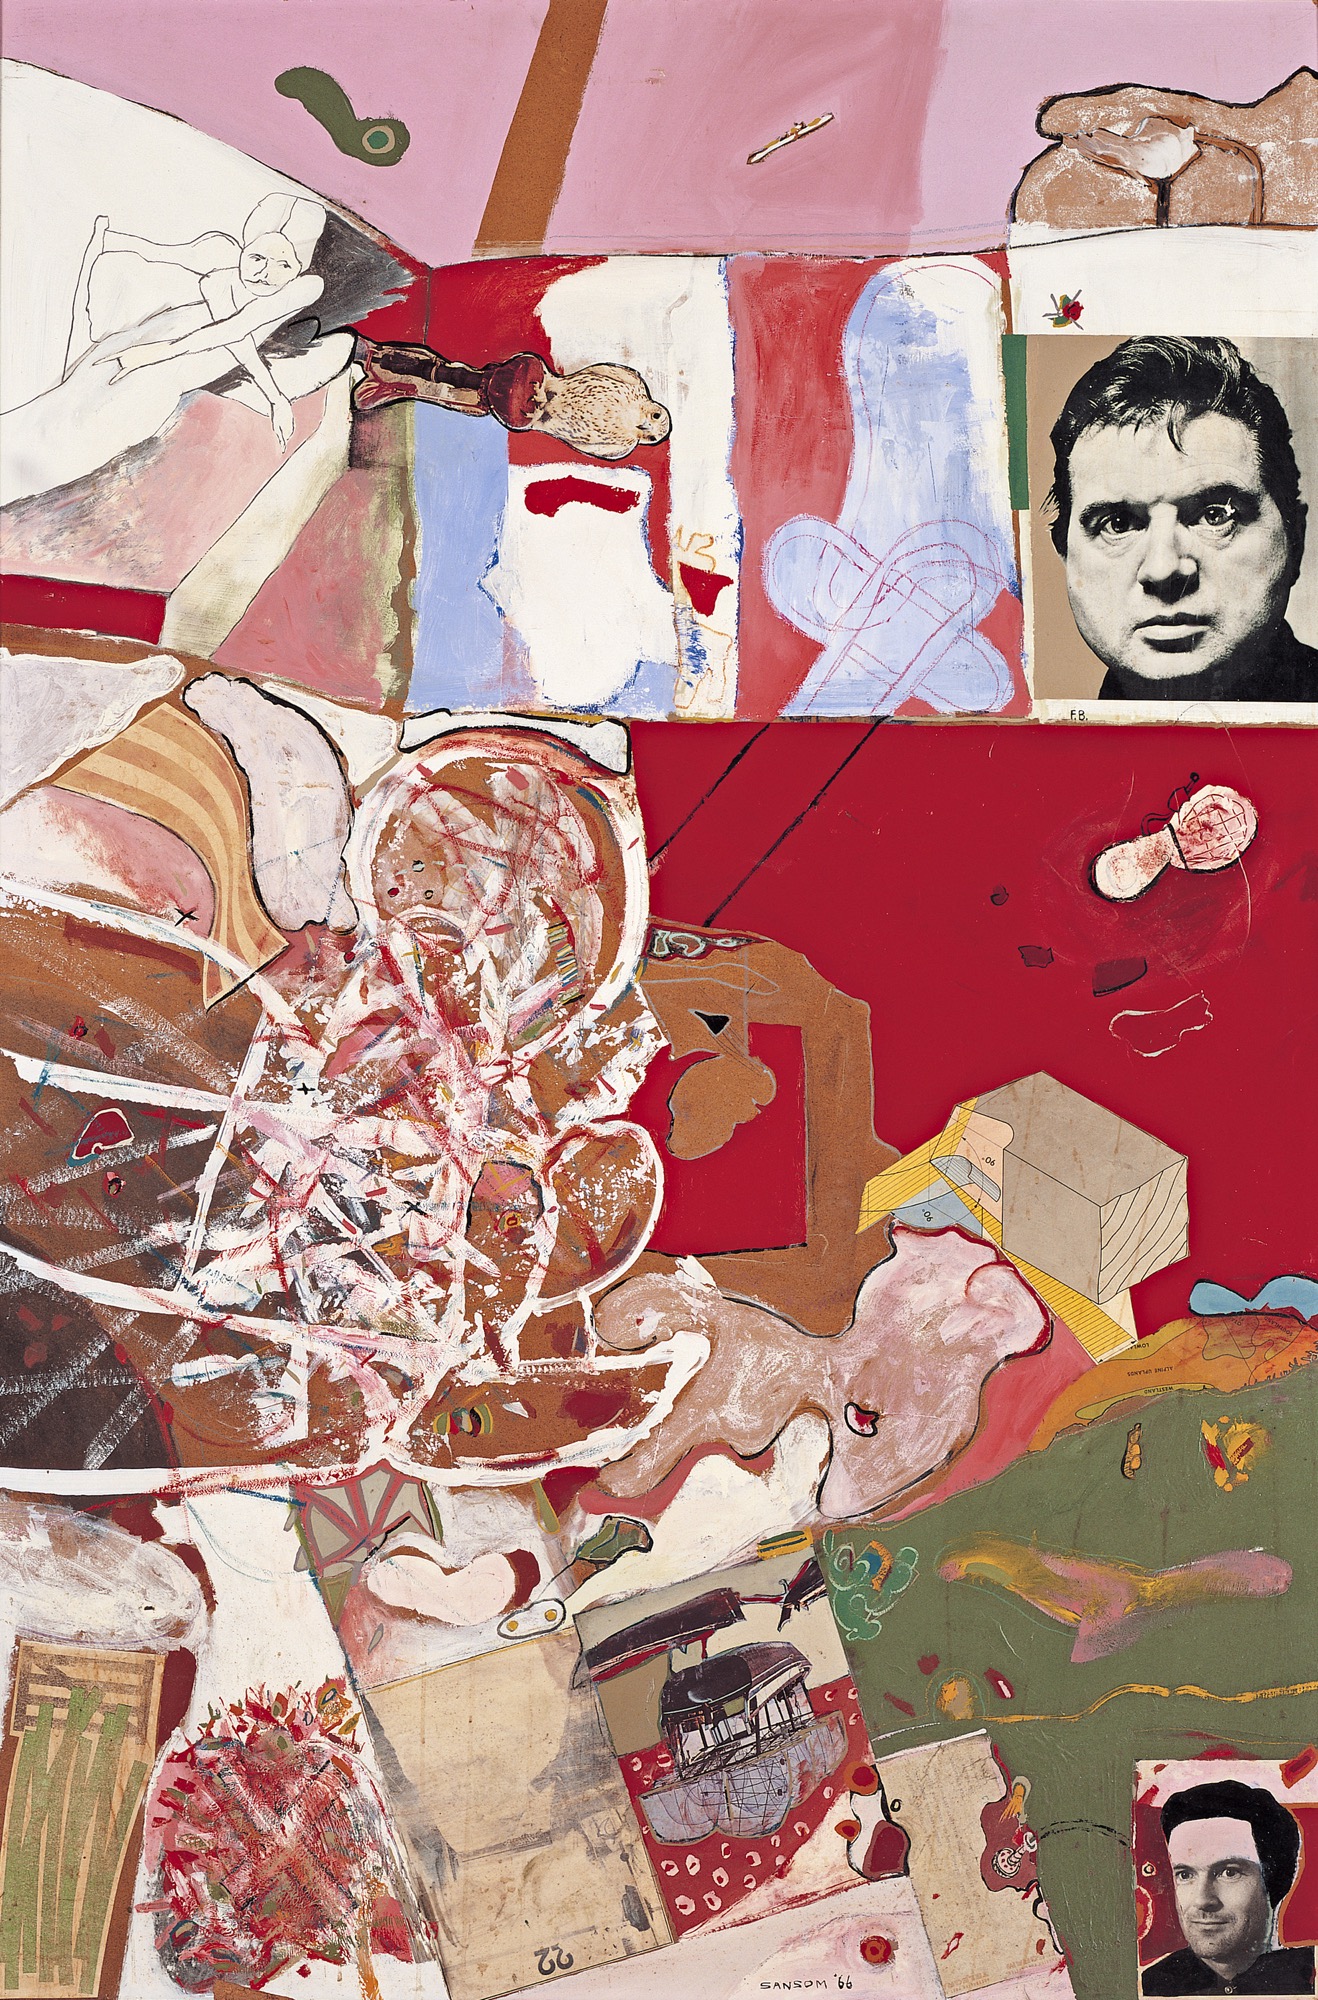 Gareth Sansom, <em>One of us must know</em>, 1966. Oil and enamel paint and collage of gelatin silver photograph, offset-photo lithograph and printed paper on composition board. 243.0 x 162.0 cm. Queensland Art Gallery, Brisbane. Purchased 1990 (1990.039) © Gareth Sansom/Administered by Viscopy, 2017